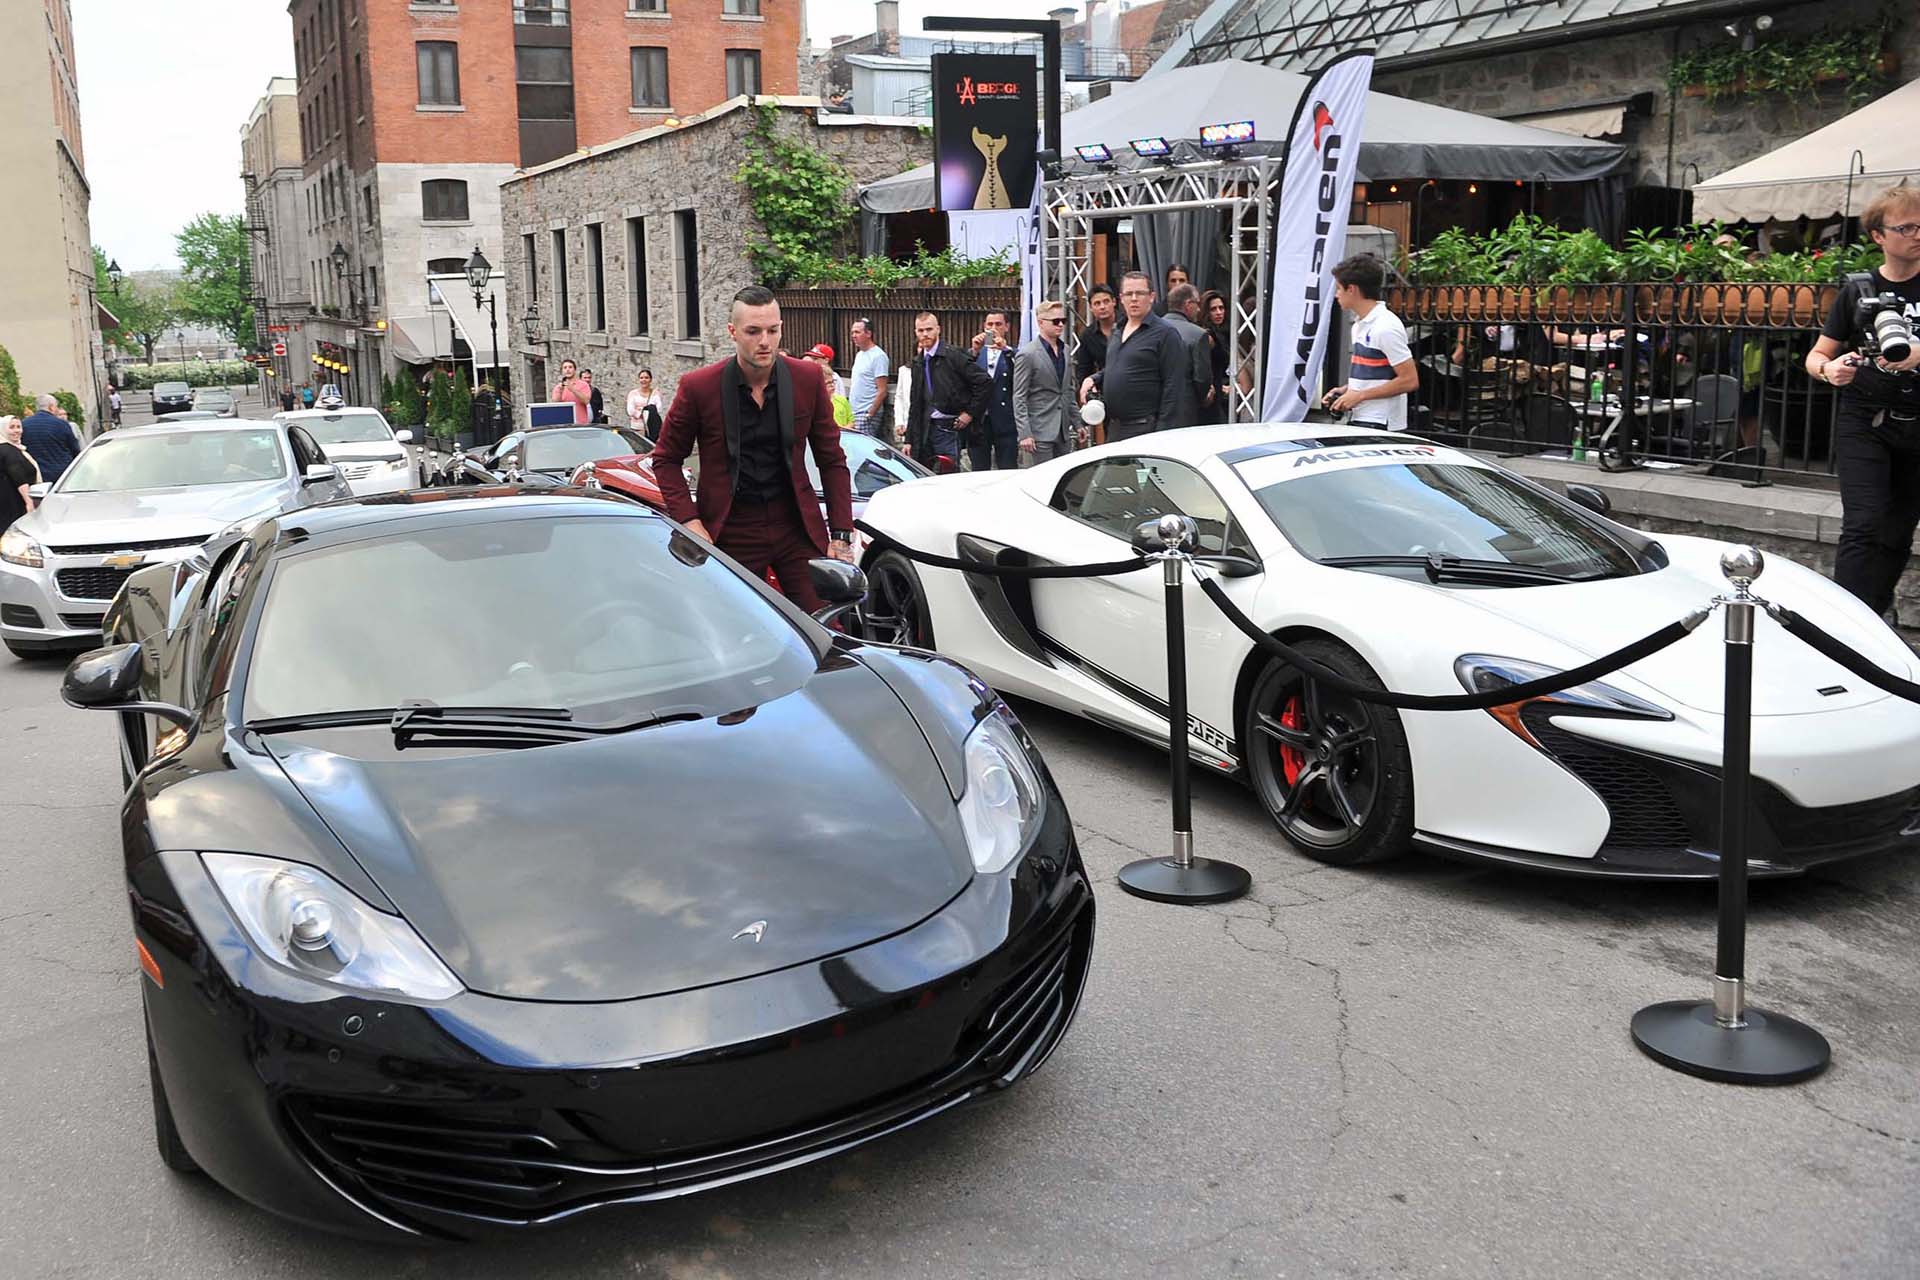 The Leafs goalie spent the off-season in style, recently turning up at a Canadian Grand Prix party in his McLaren MP4-12C. It's a sure bet that cruising around in that work of art is a lot more fun than facing 50 shots a game, which is pretty much what he's heading into this season.